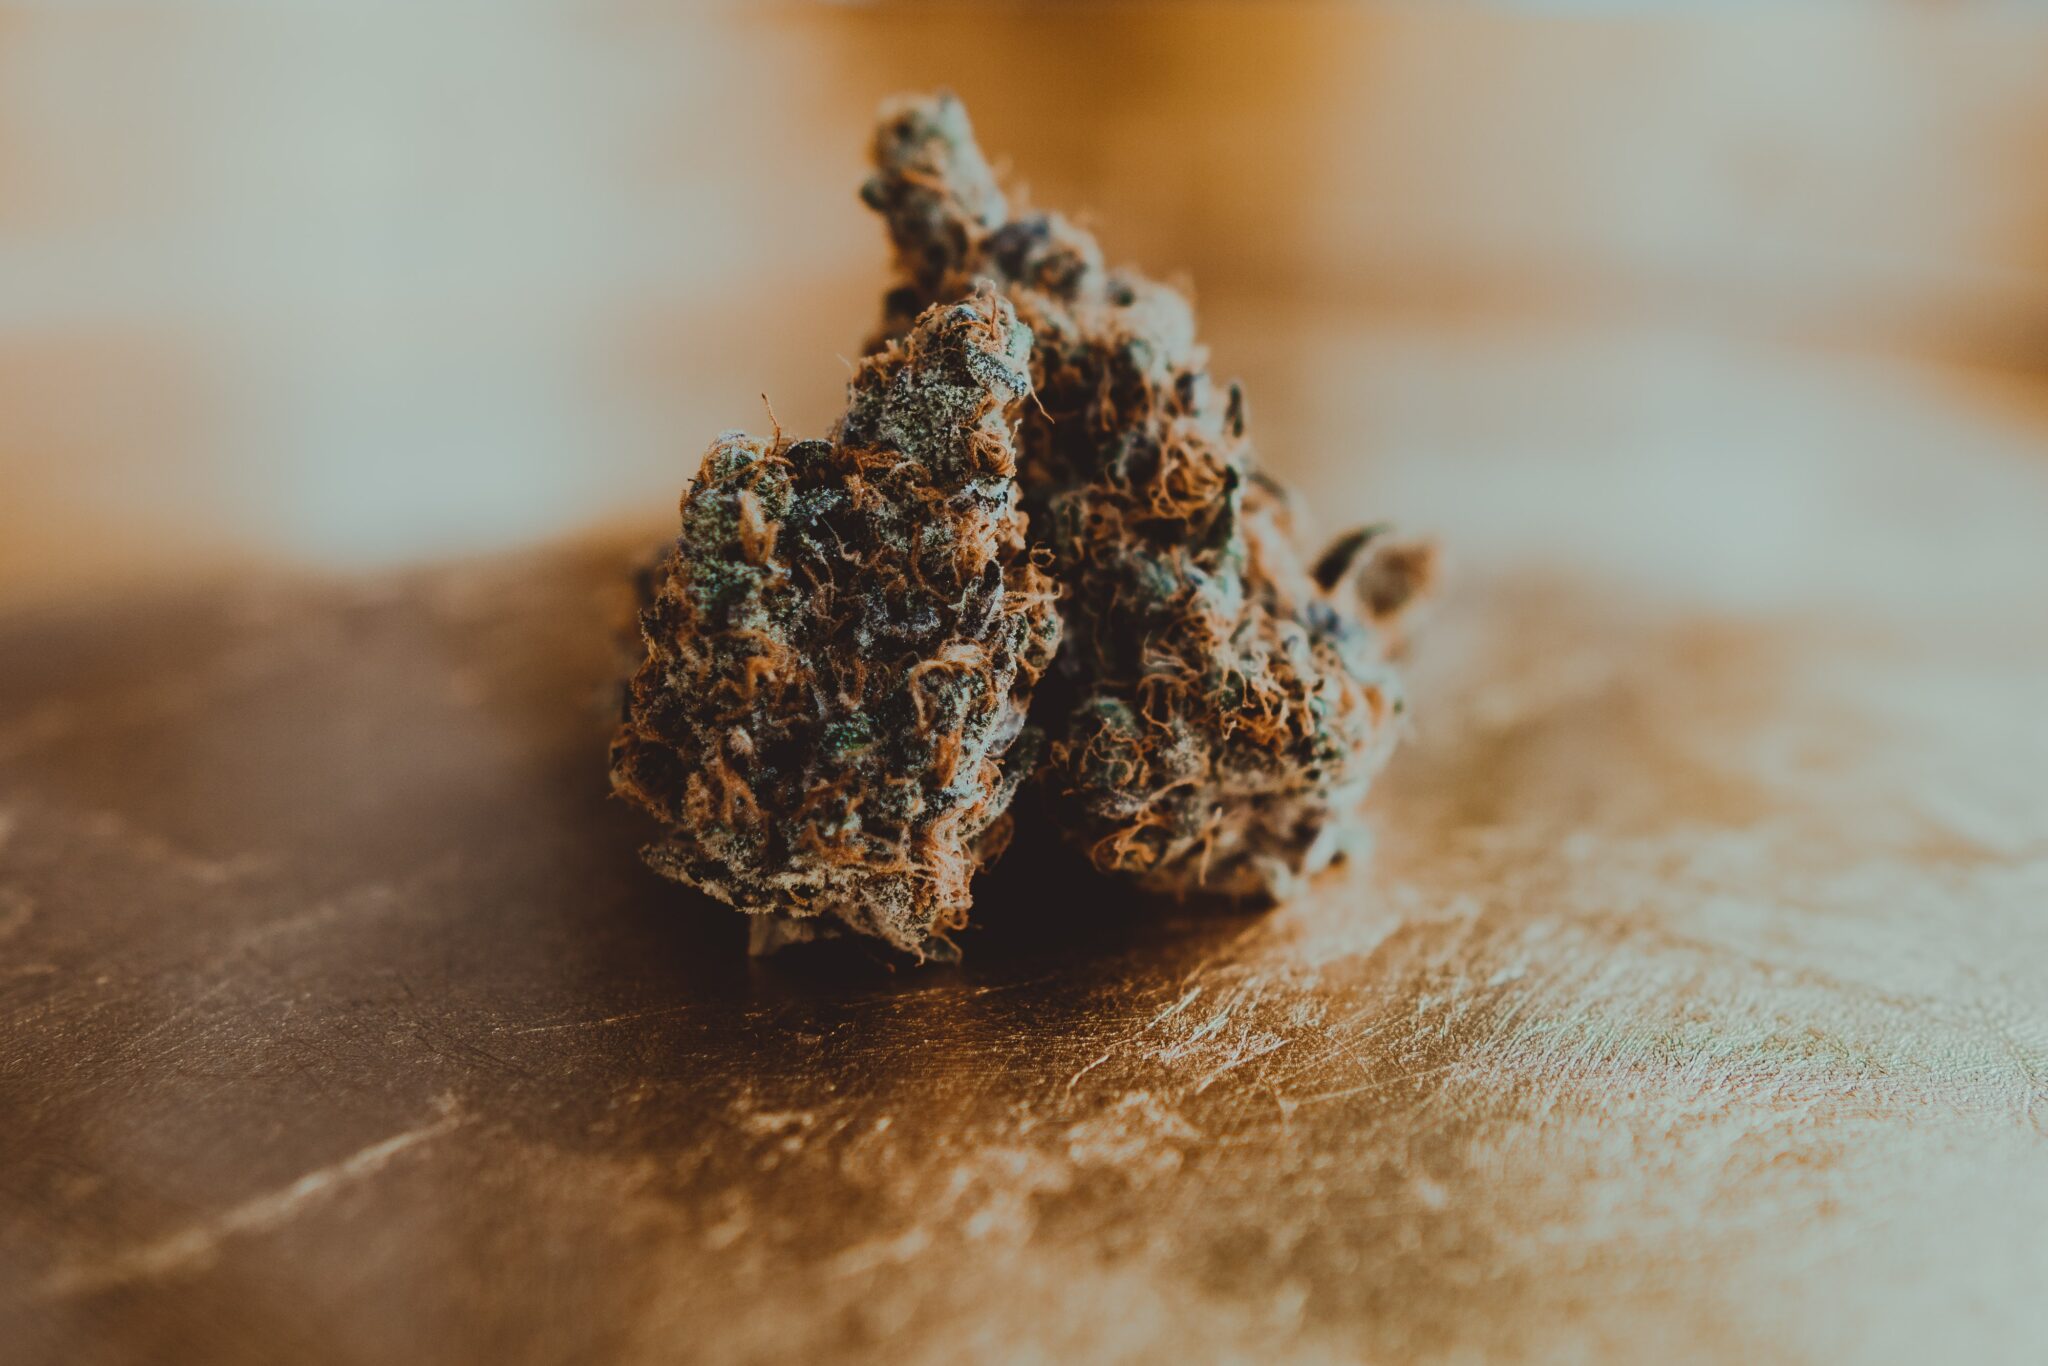 photo by matthew sichkaruk on unsplash_How much does an eighth of weed cost?